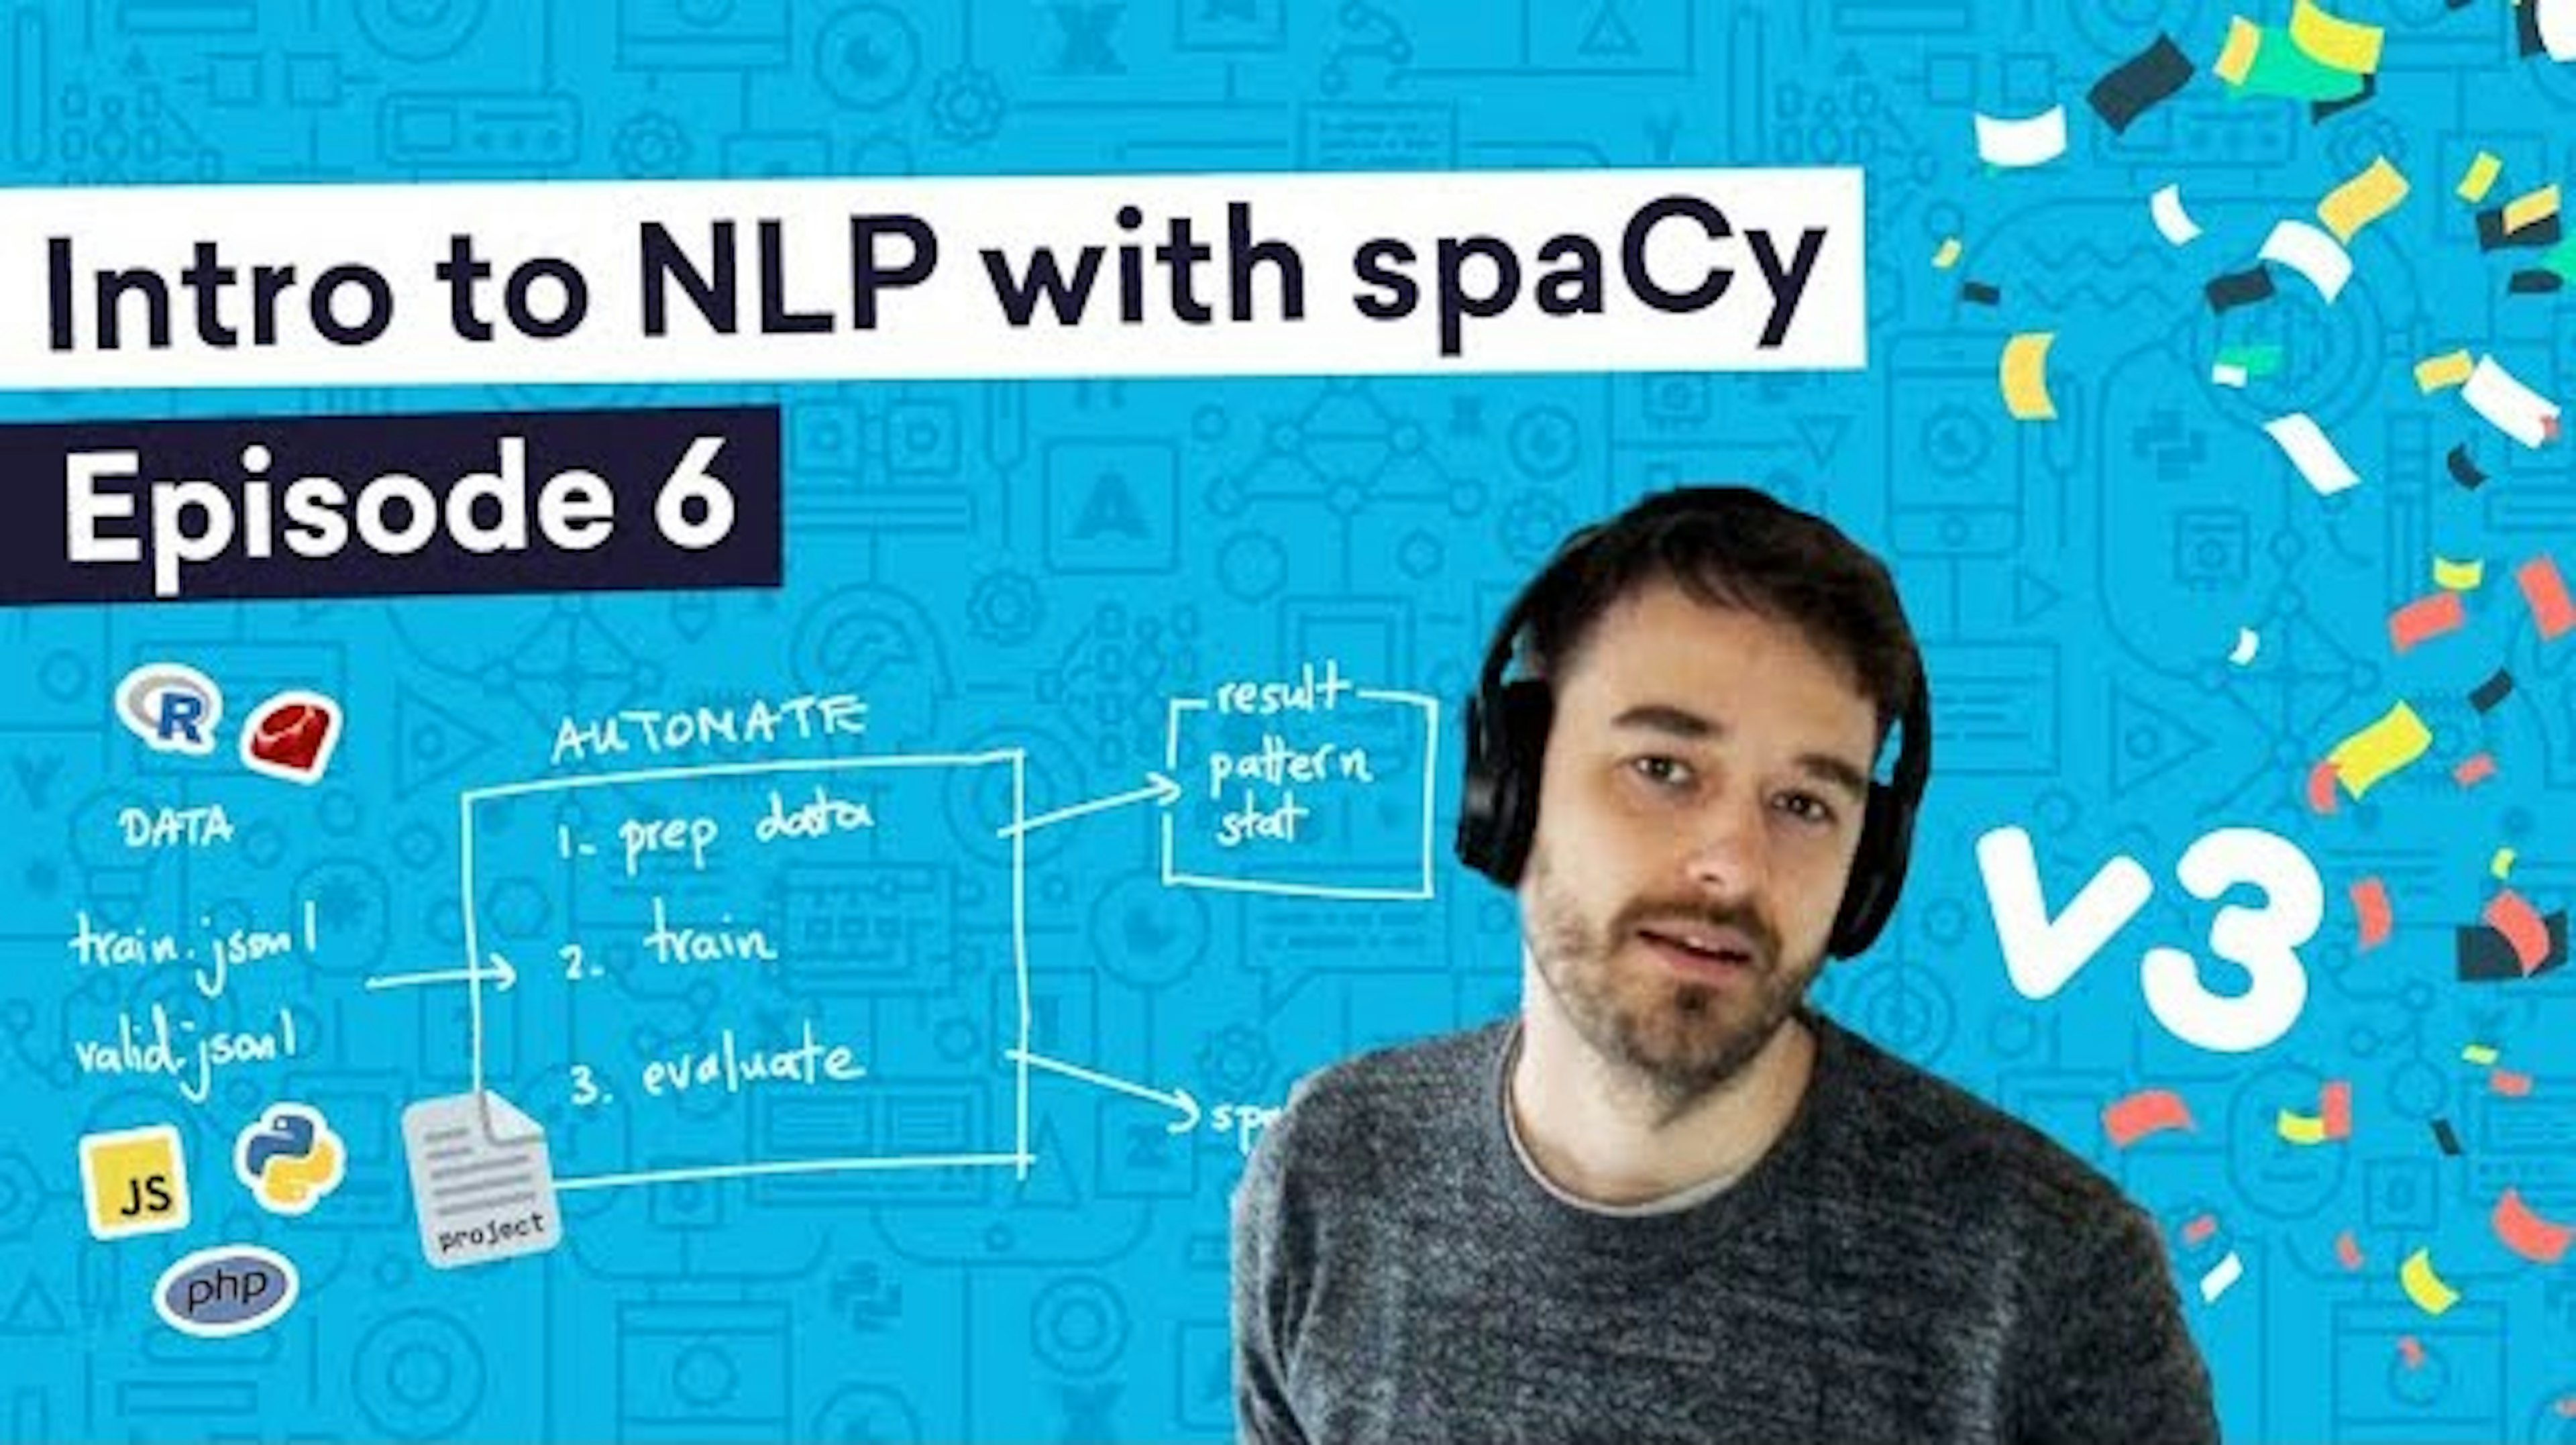 Intro to NLP with spaCy (6): Detecting programming languages